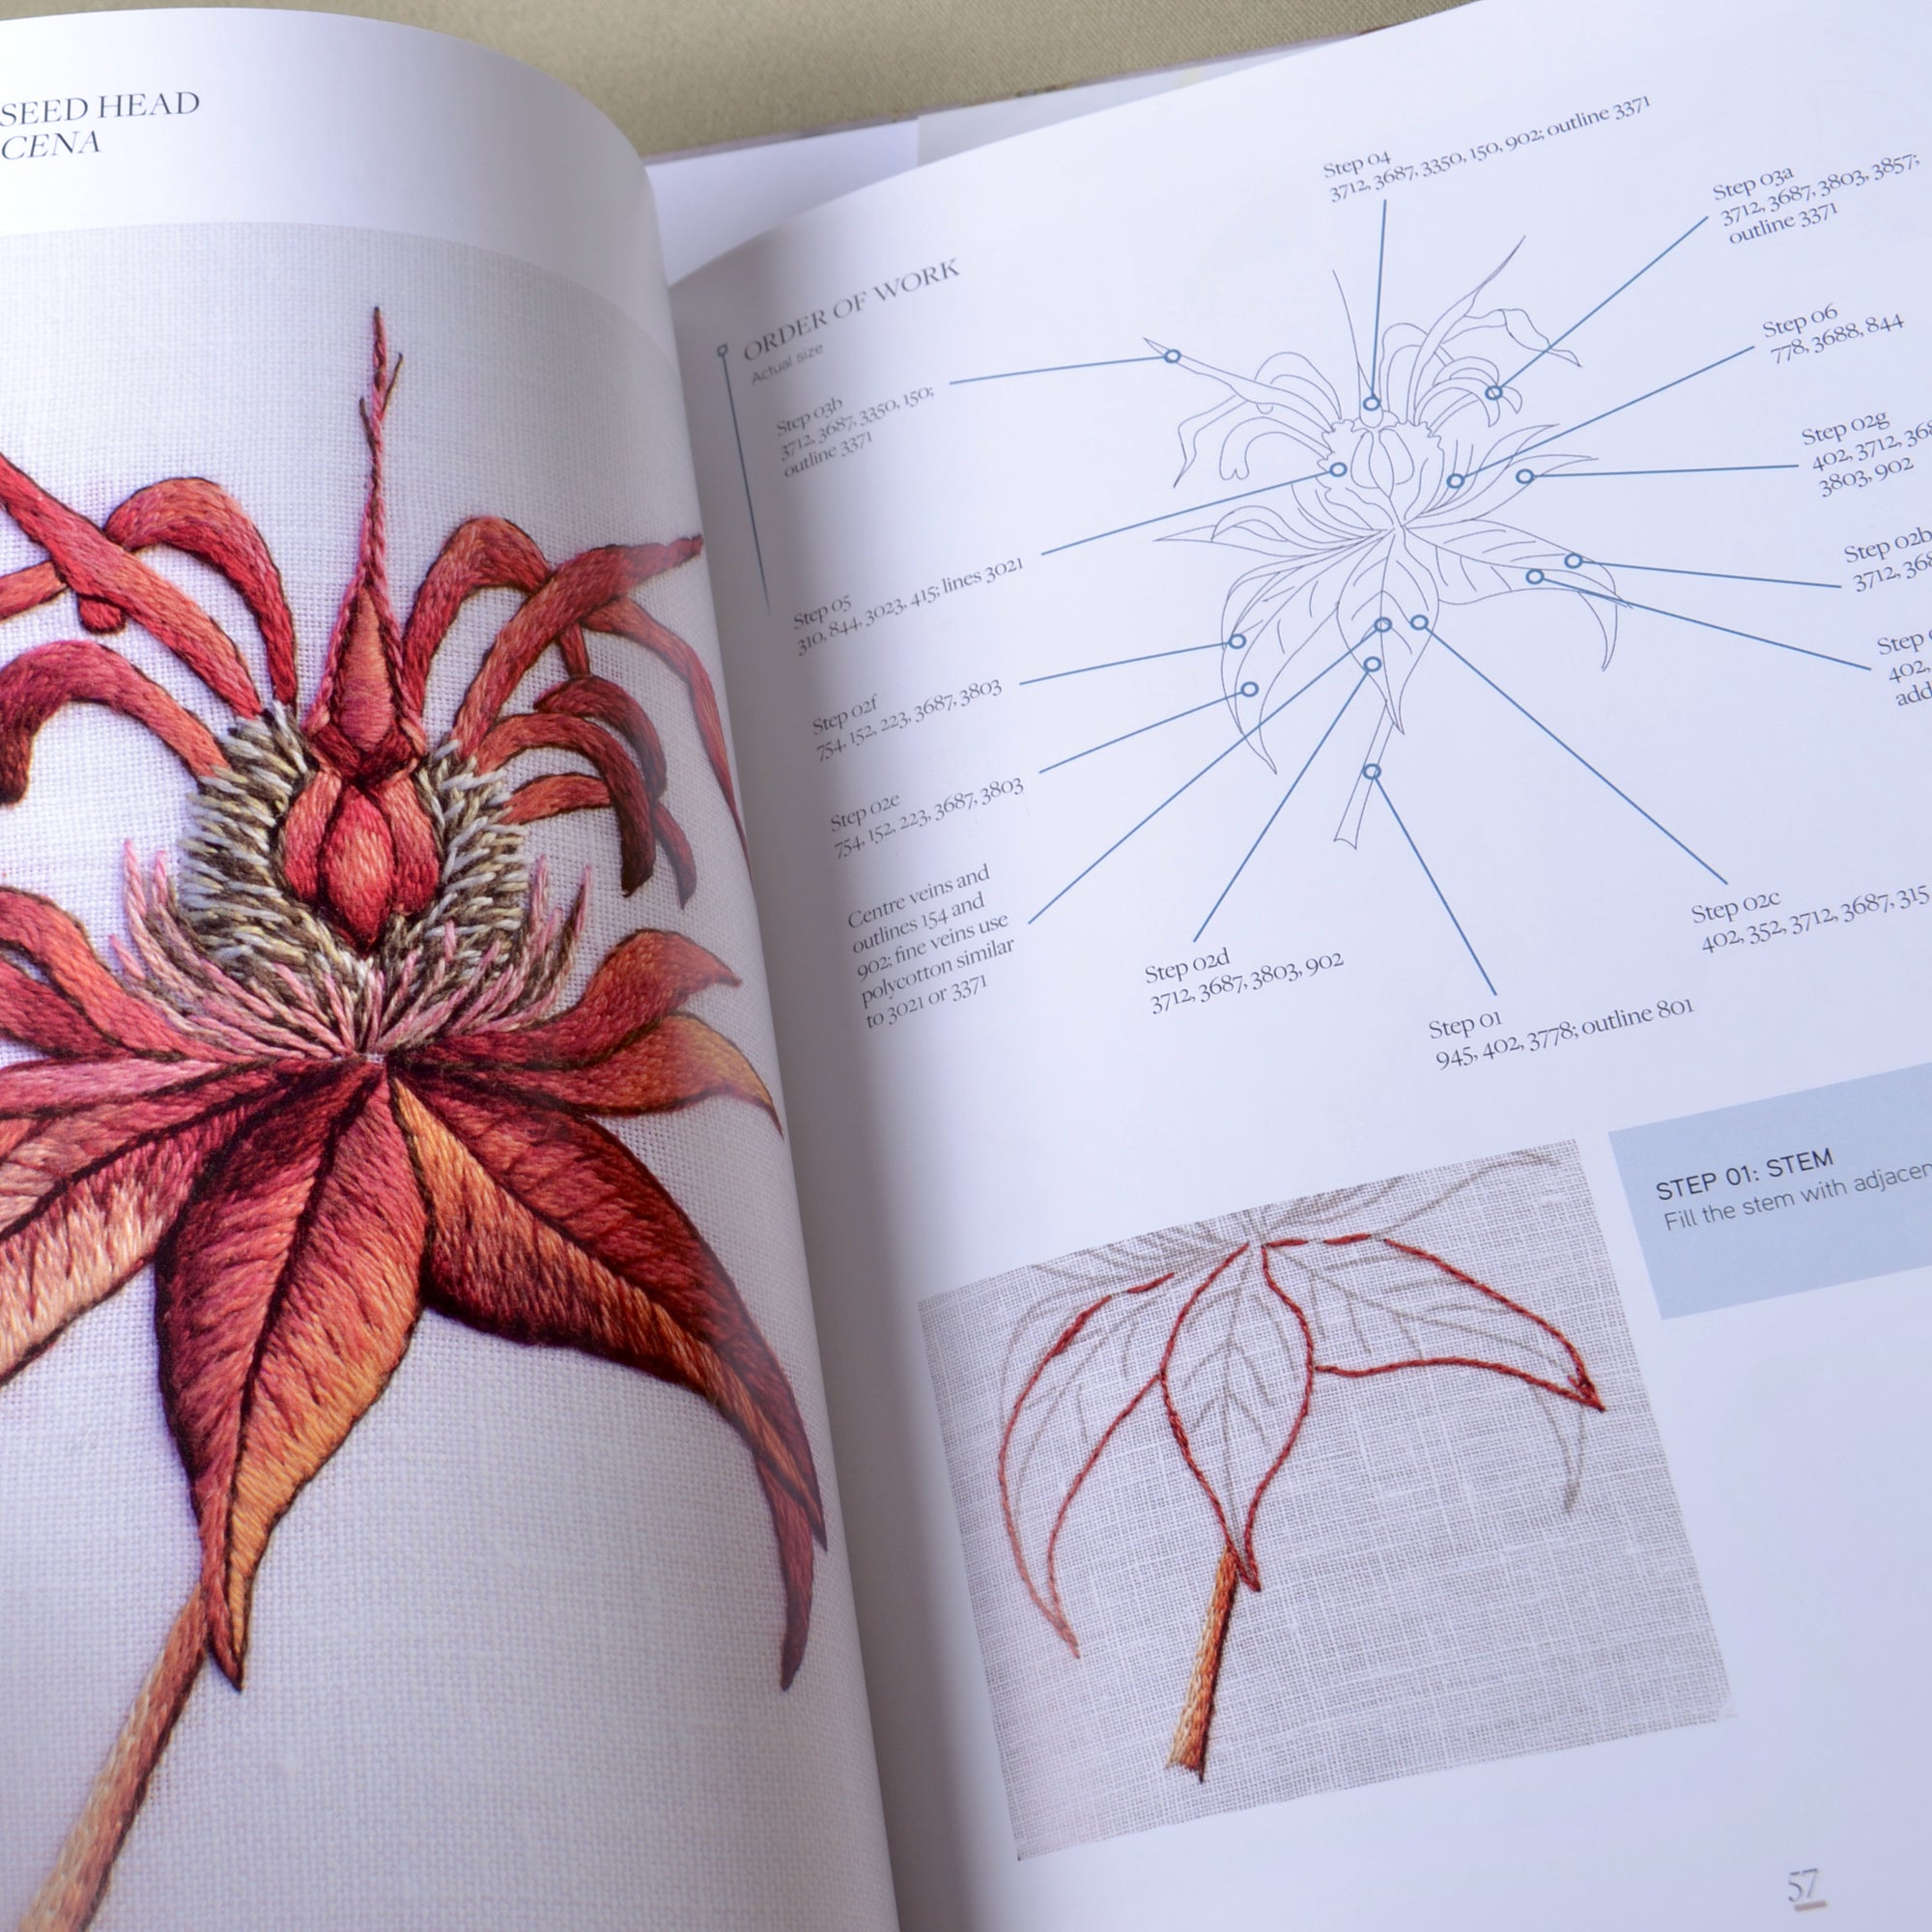 Kew Book of Embroidered Flowers